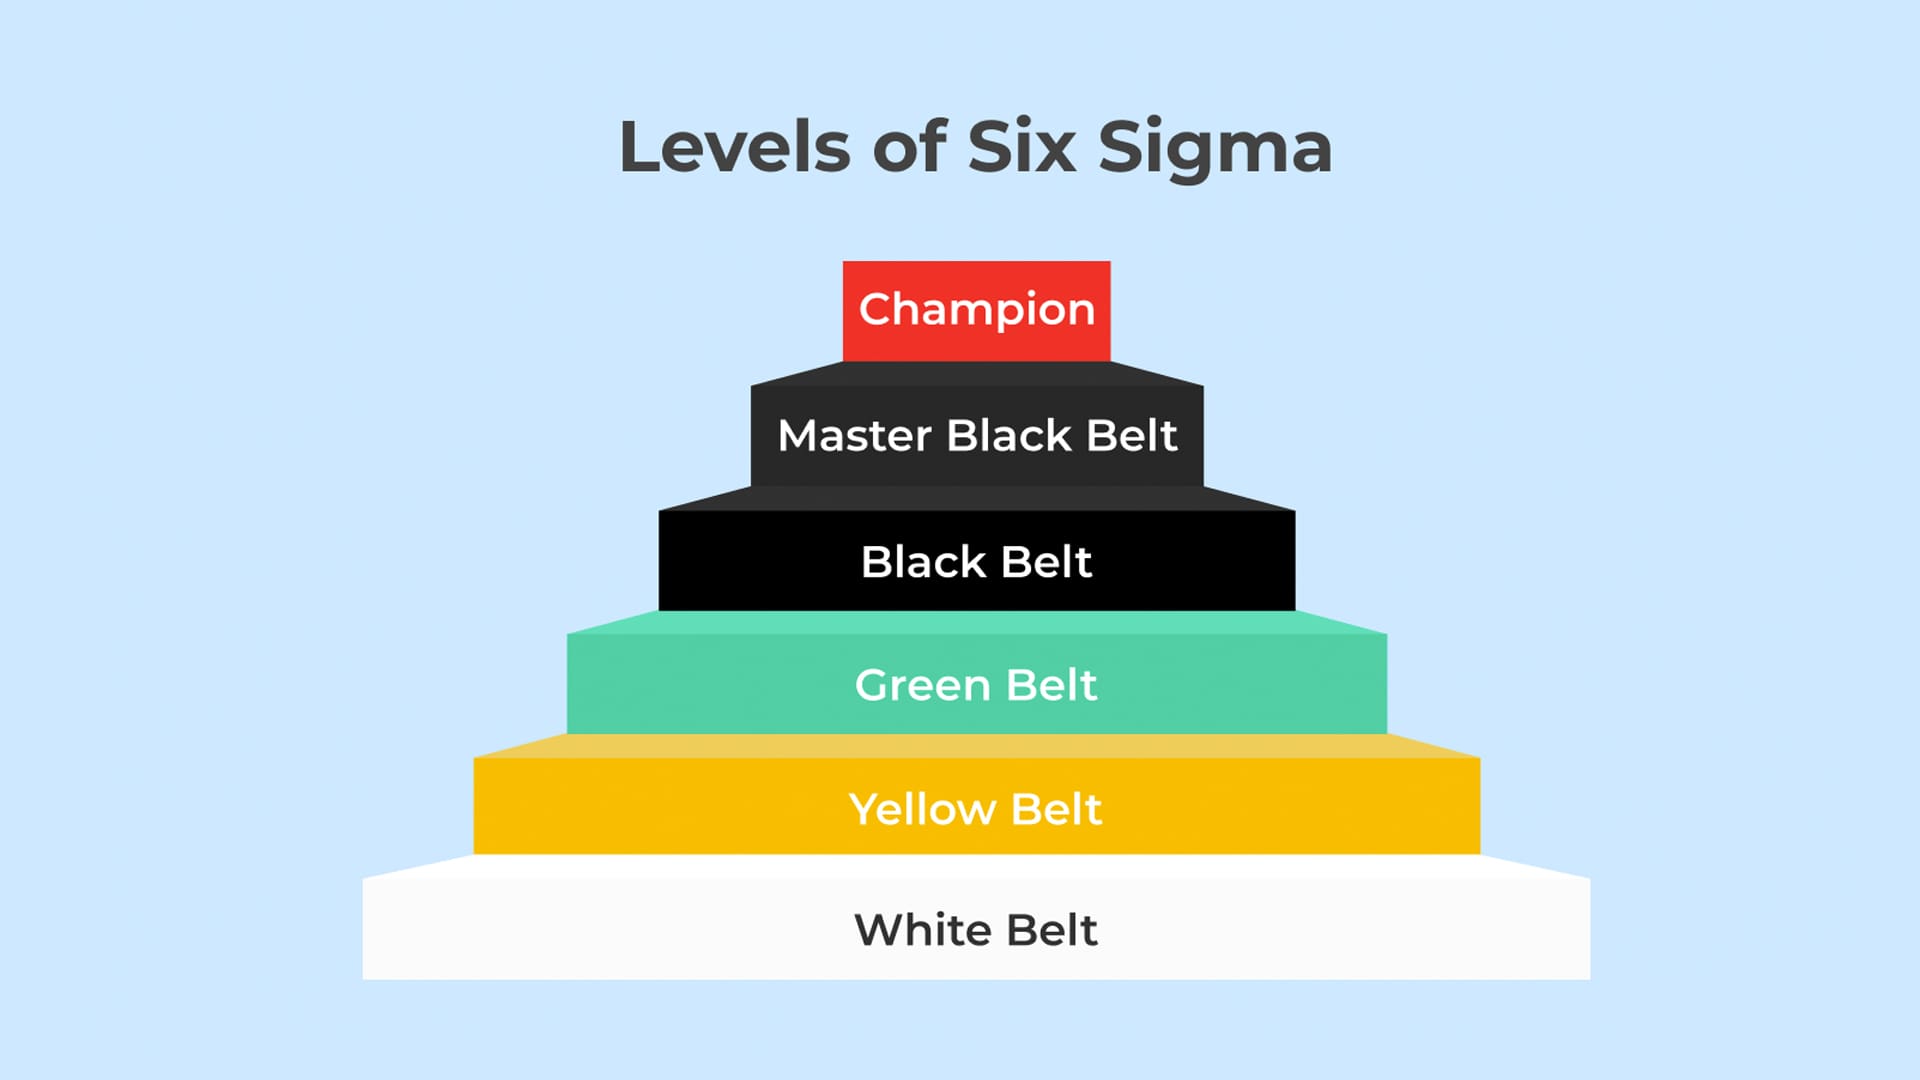 What are the levels of Six Sigma?